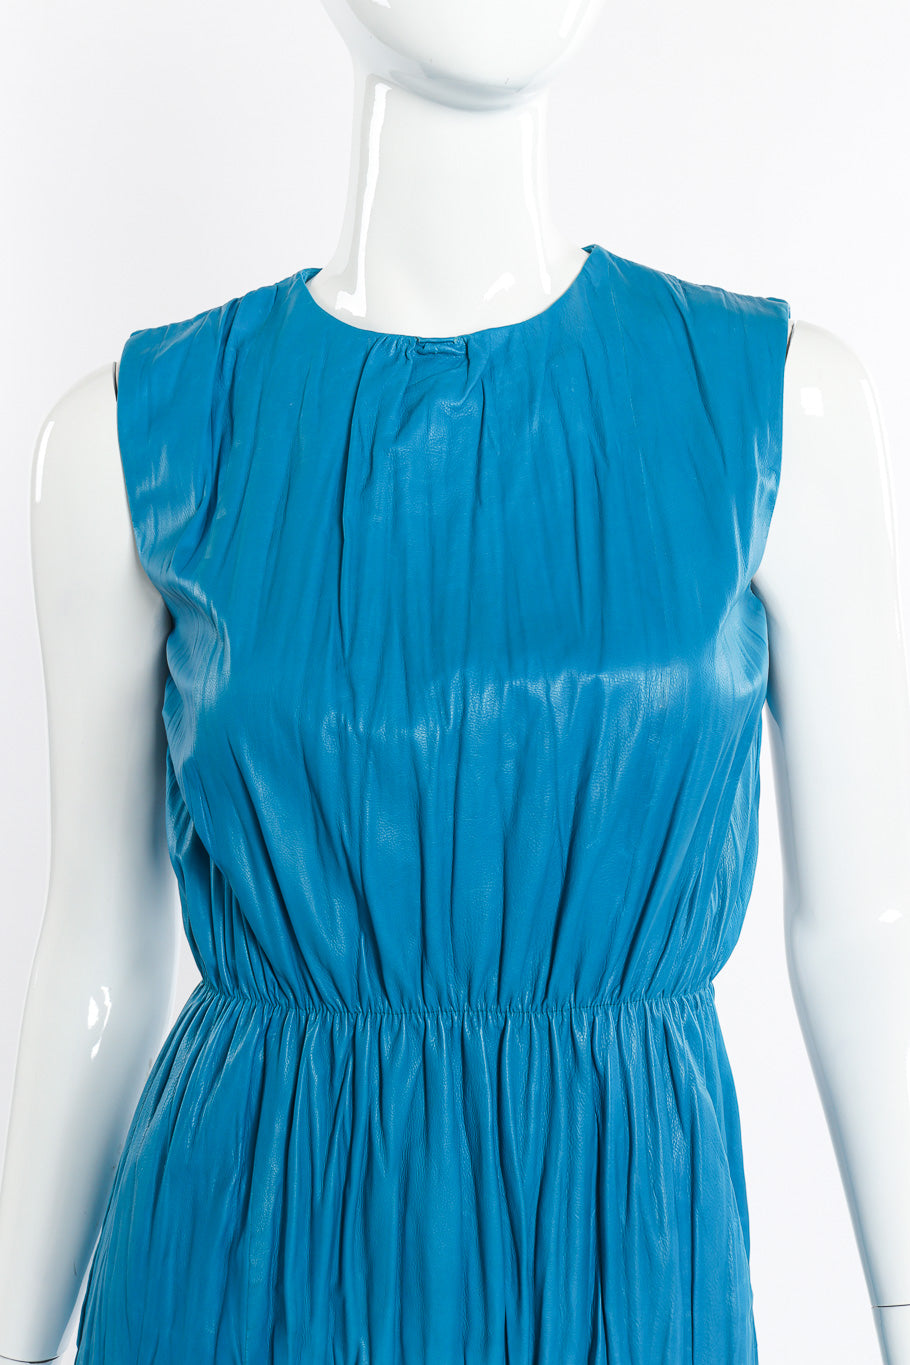 Gucci Sleeveless Pleated Leather Dress front without brooch @recessla